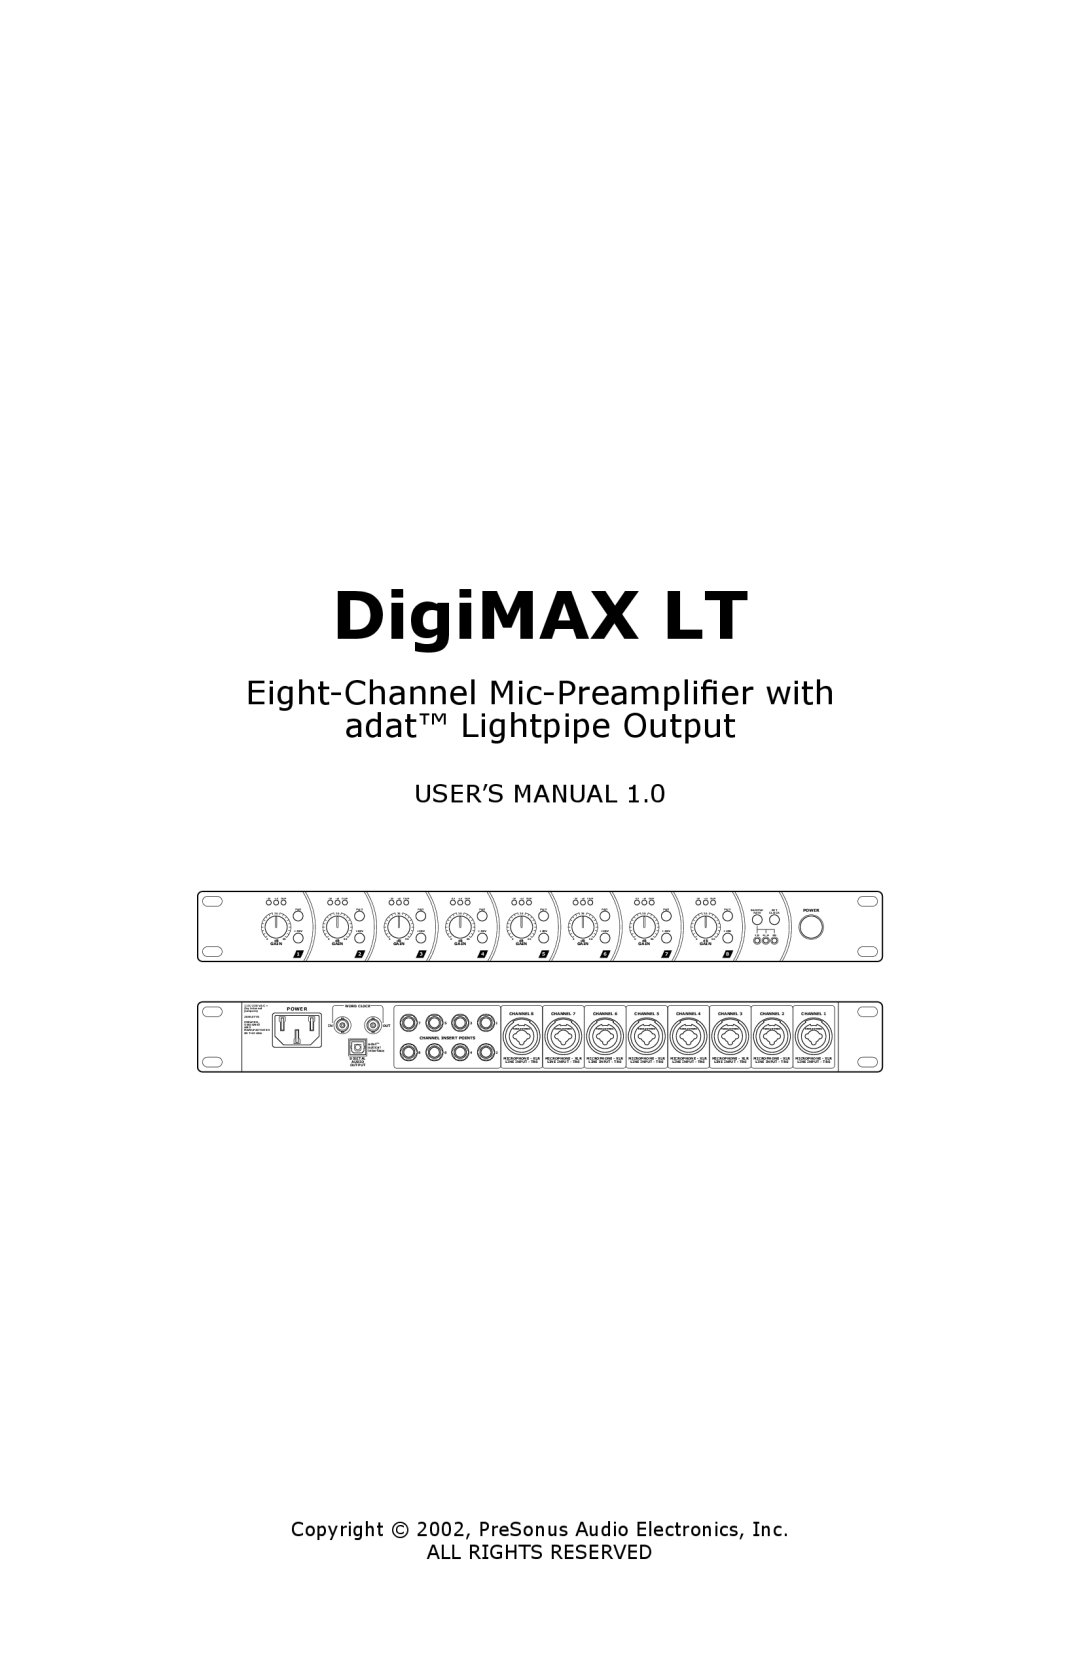 Presonus Audio electronic DigiMAX LT user manual Eight-Channel Mic-Preamplifierwith, adat Lightpipe Output 